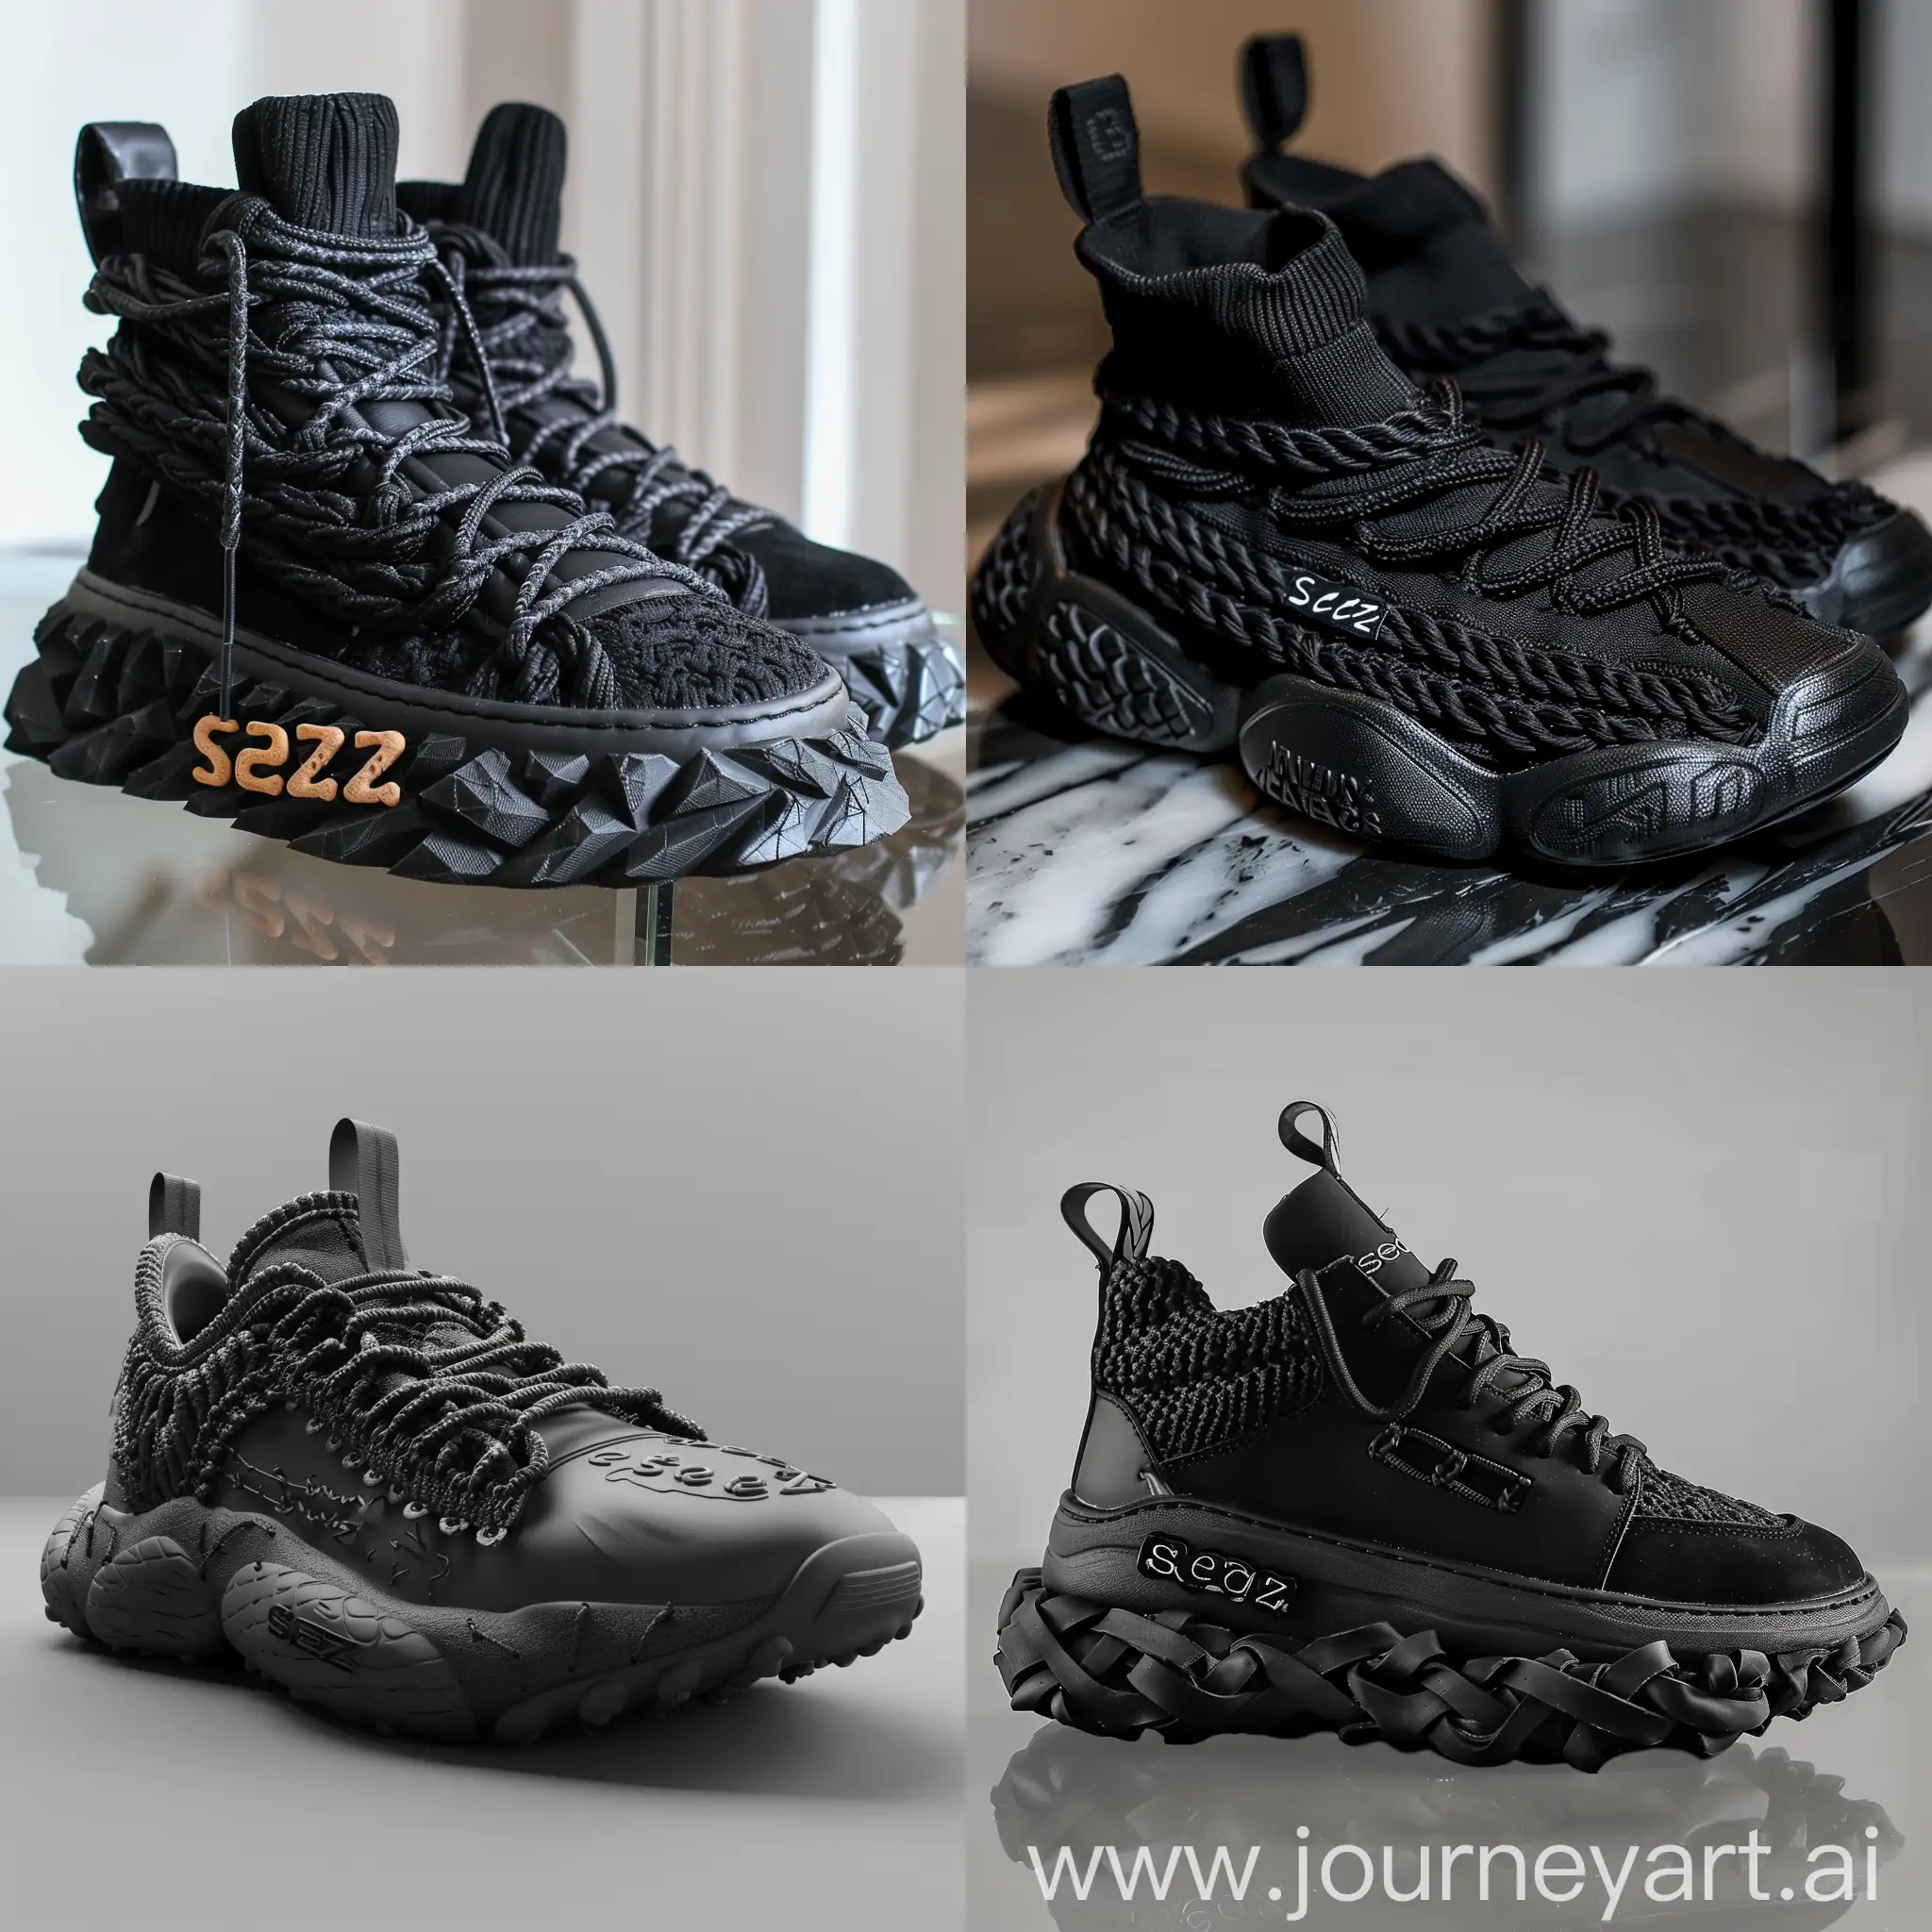 Oversized Sneakers design , inspiration by knitted fabrics , some knitted cables on it , knitted cables rubber midsole inspiration ,  chunky , trendy ,main color black , butter knitted laces , some black leather on top , some black suede for tongue and upper , draw knitted word (sedz) on outsole as logo